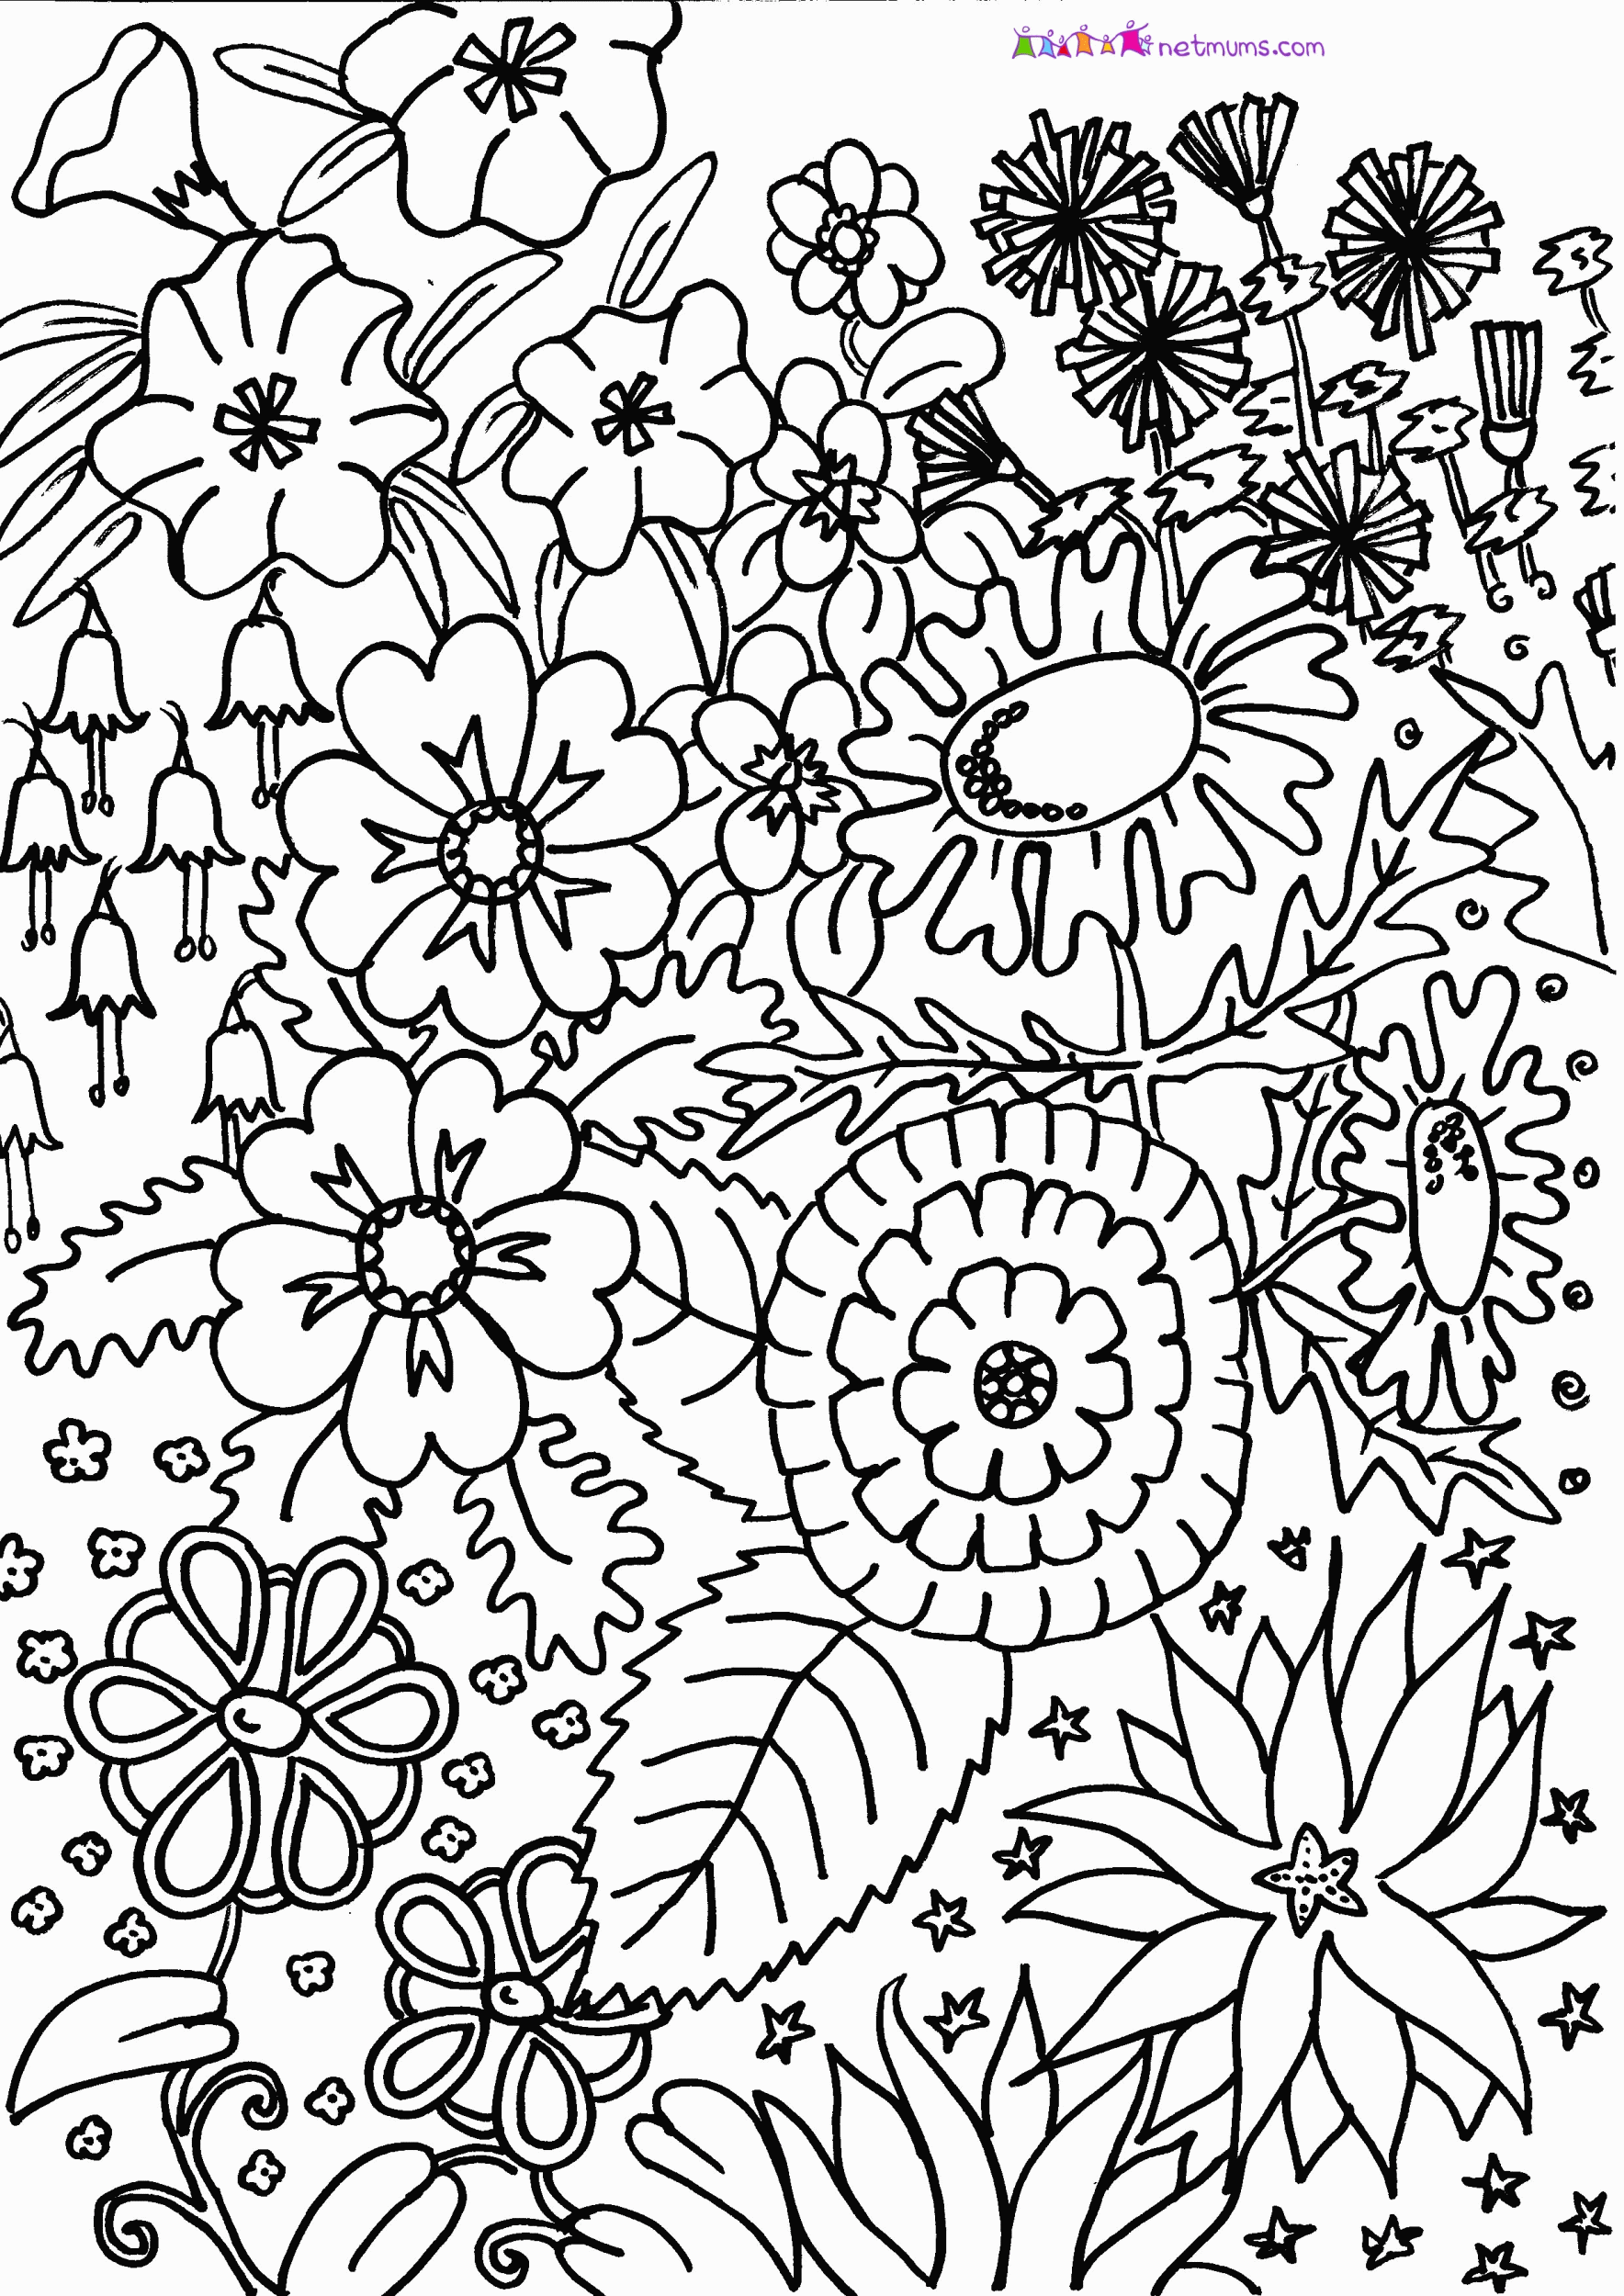 Flower Garden Coloring Pages Printable - High Quality Coloring Pages